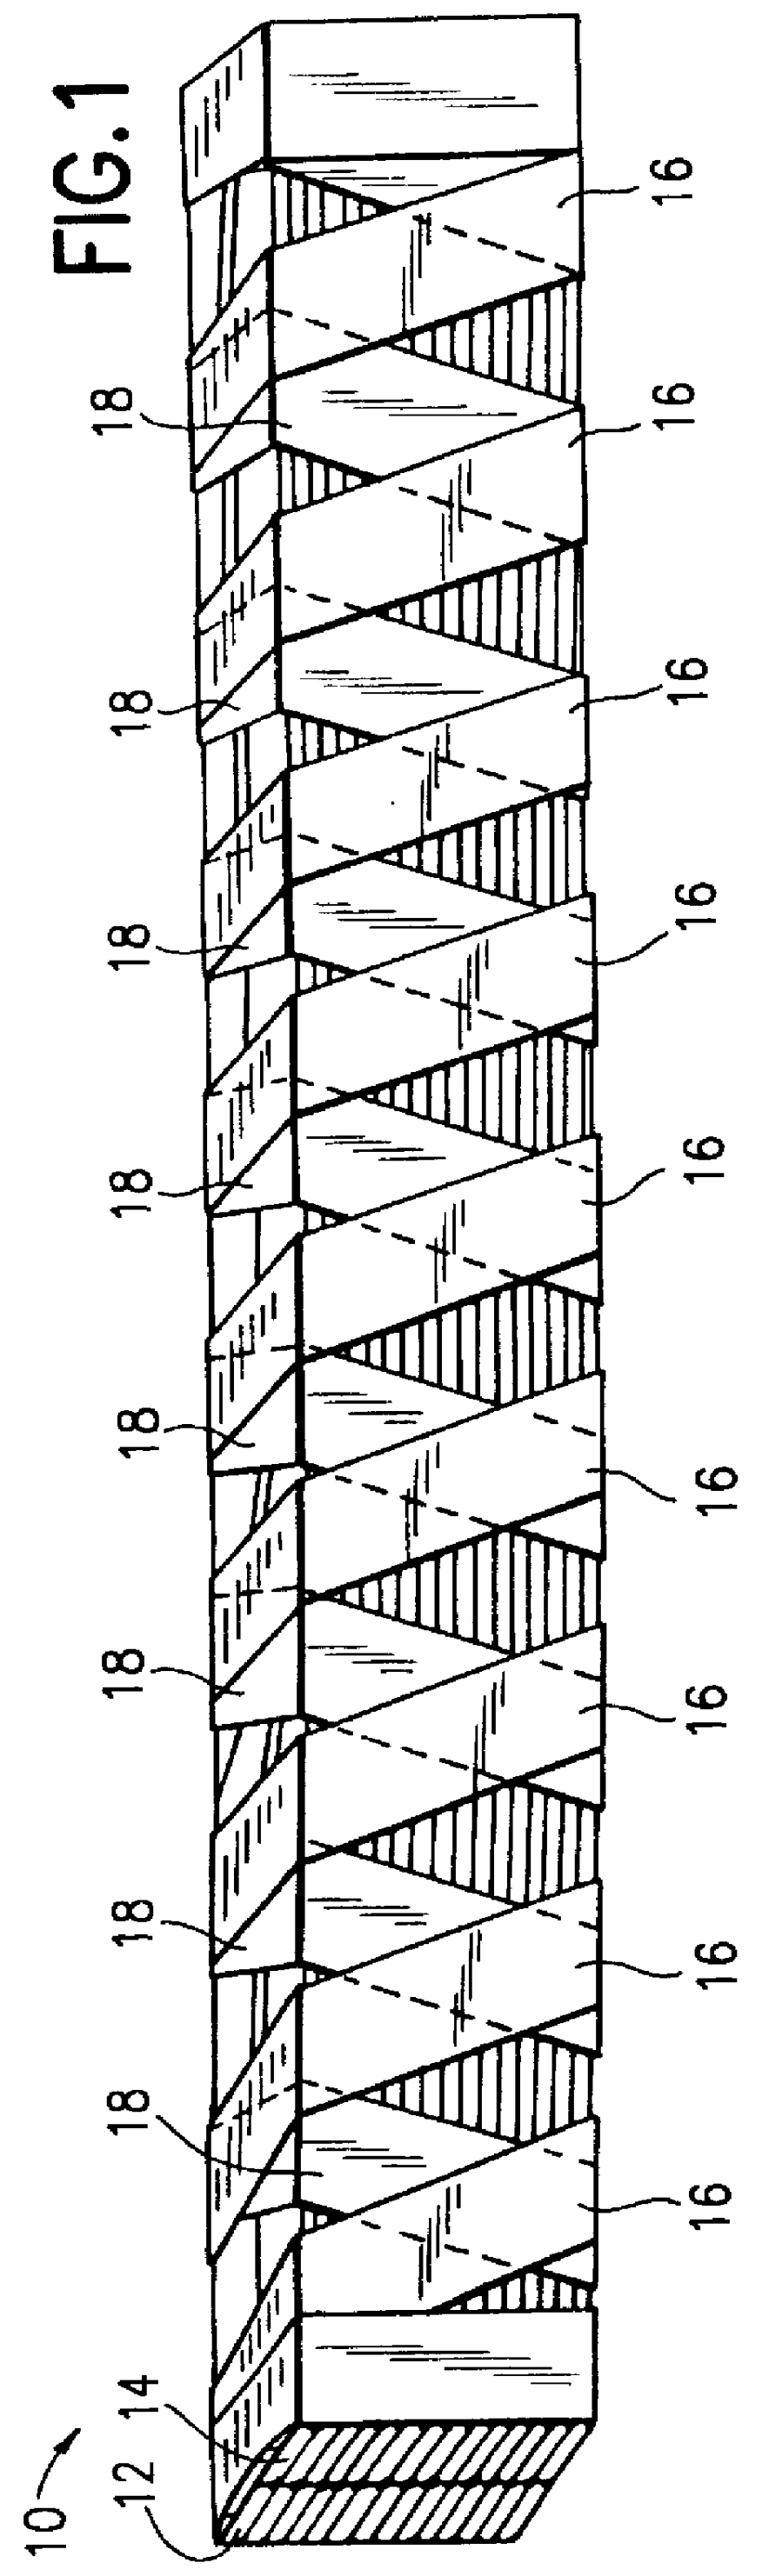 Multiple parallel conductor featuring conductors partially wrapped with an aramid or other suitable wrapping material